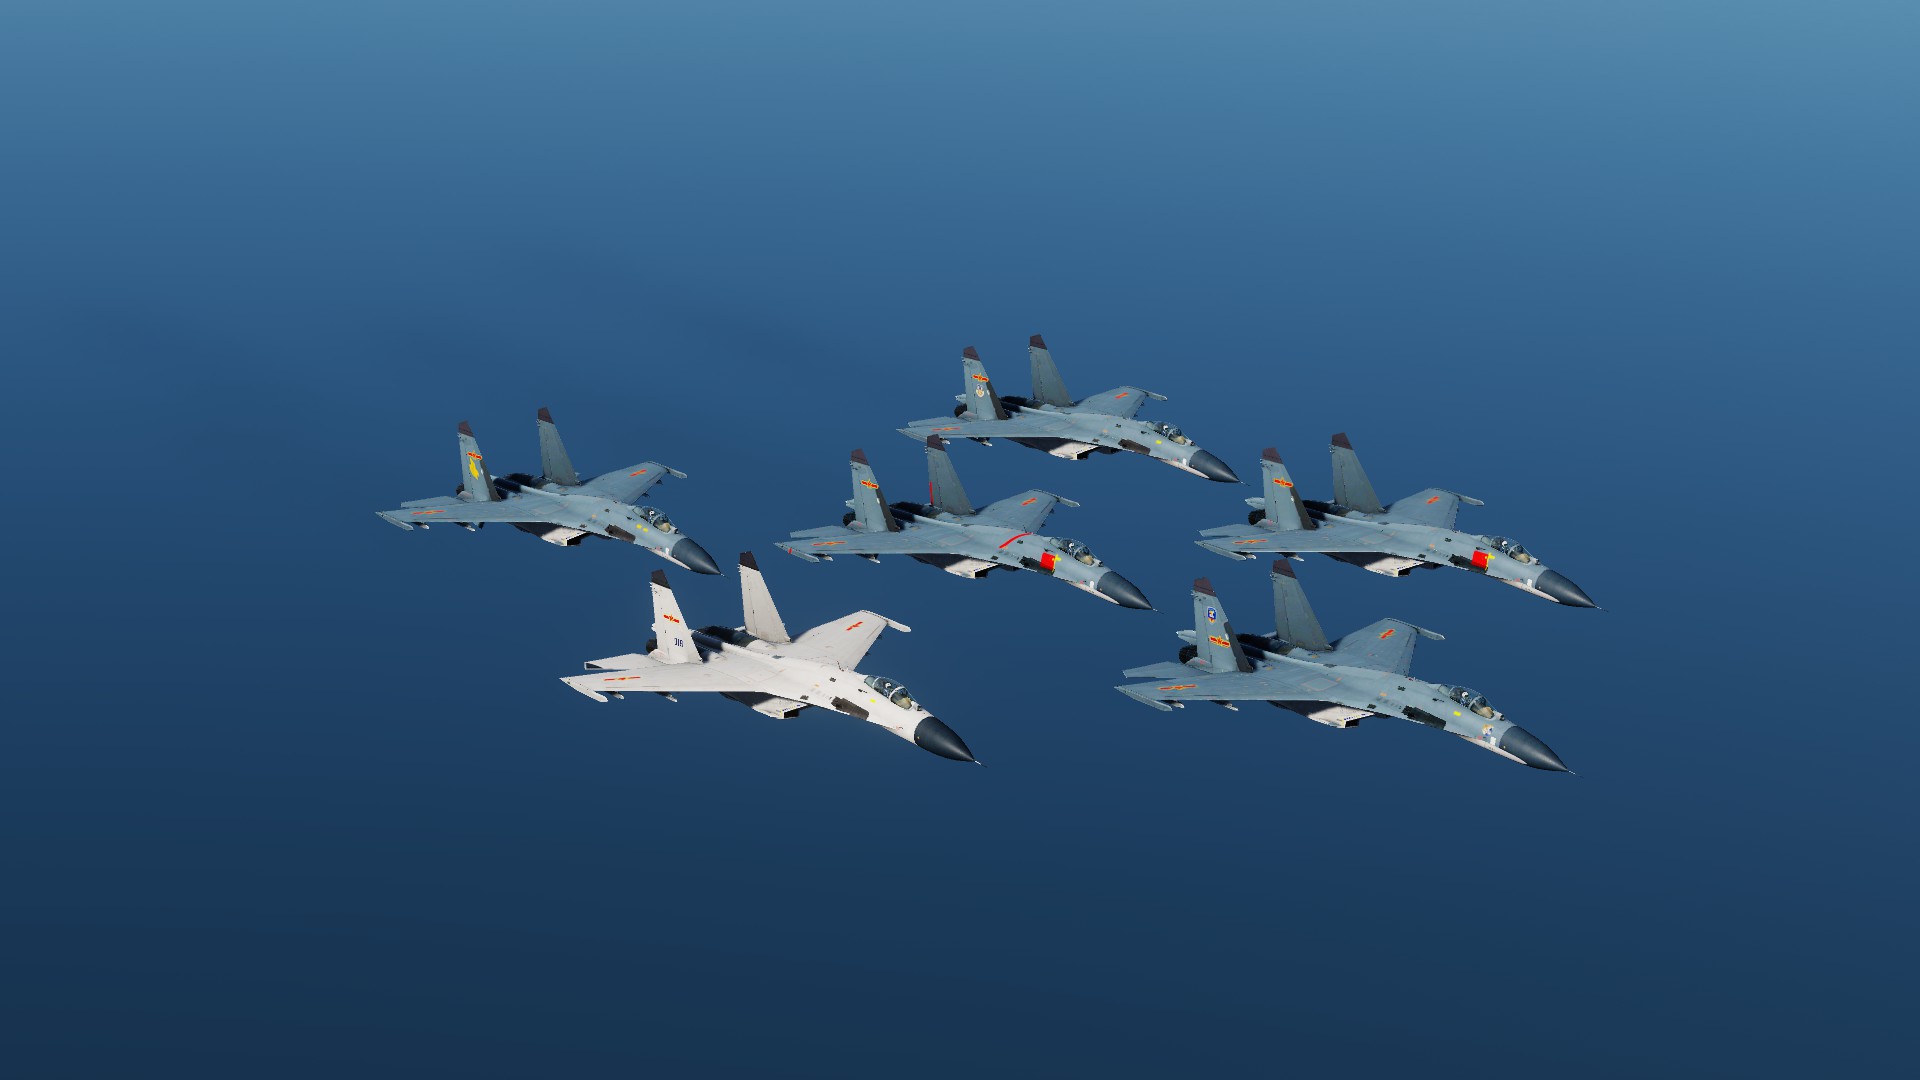 PLAAF Su-27 skins for the J-11A